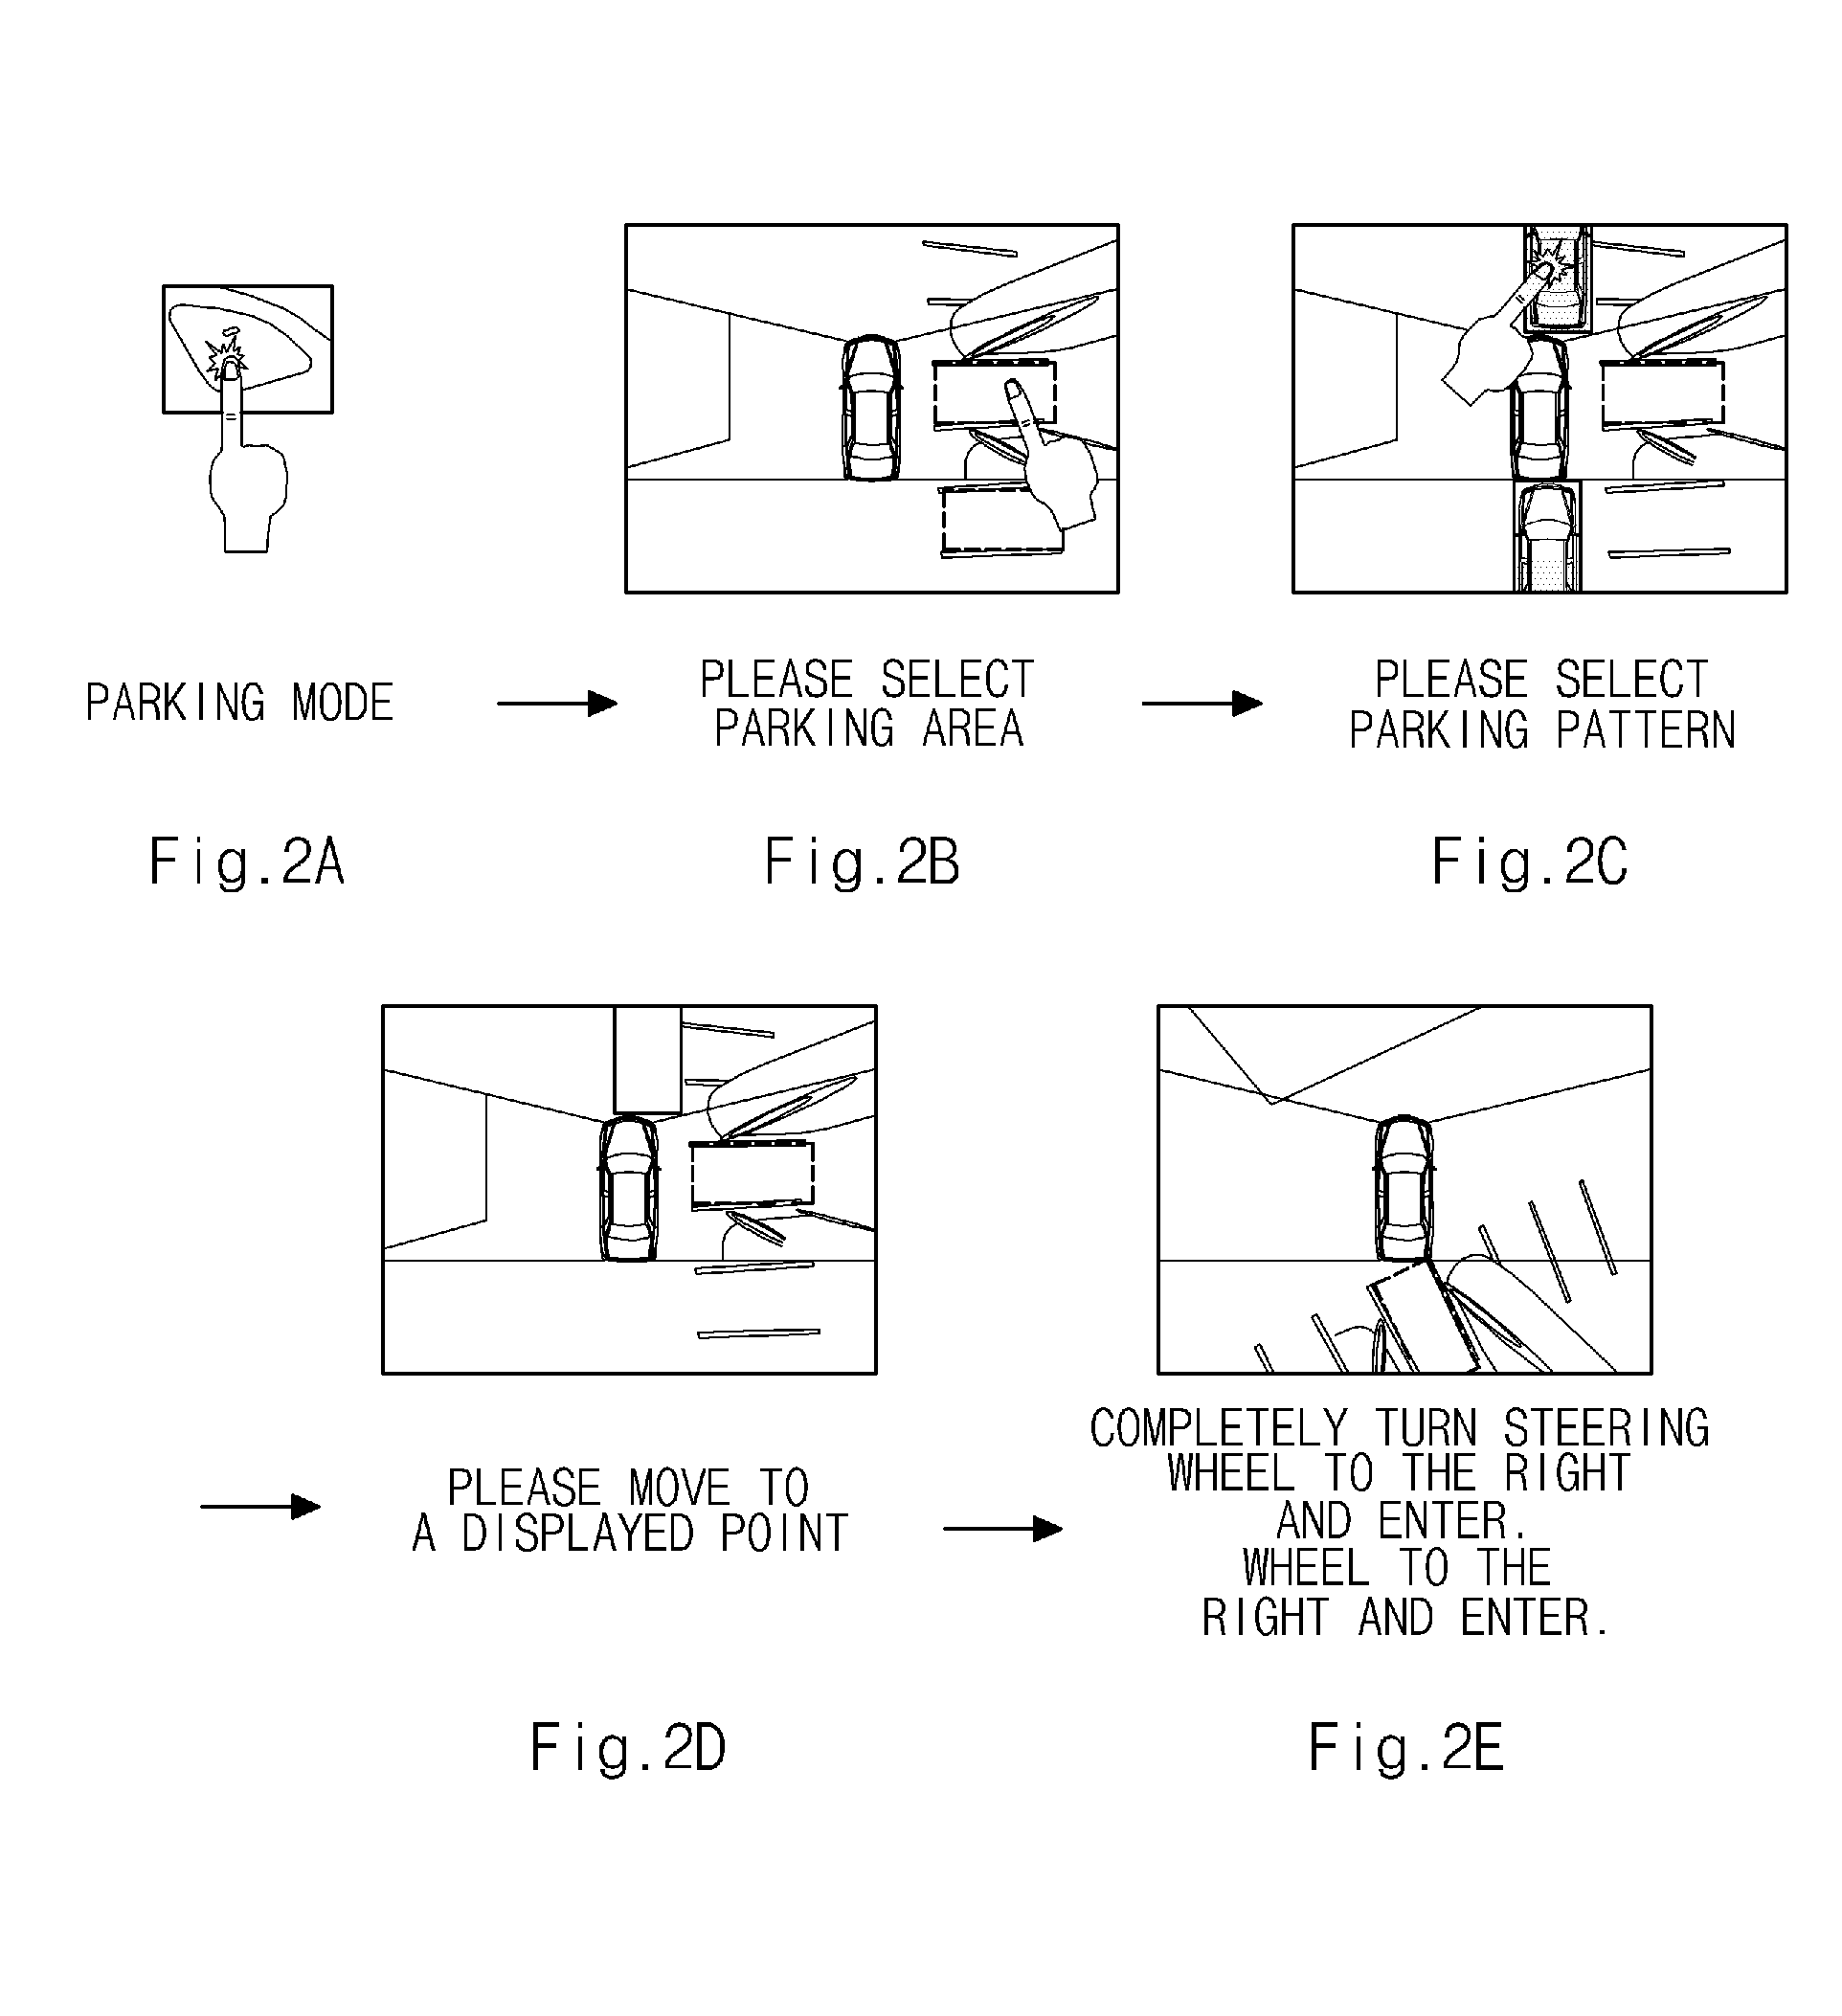 Apparatus and method for guiding parking